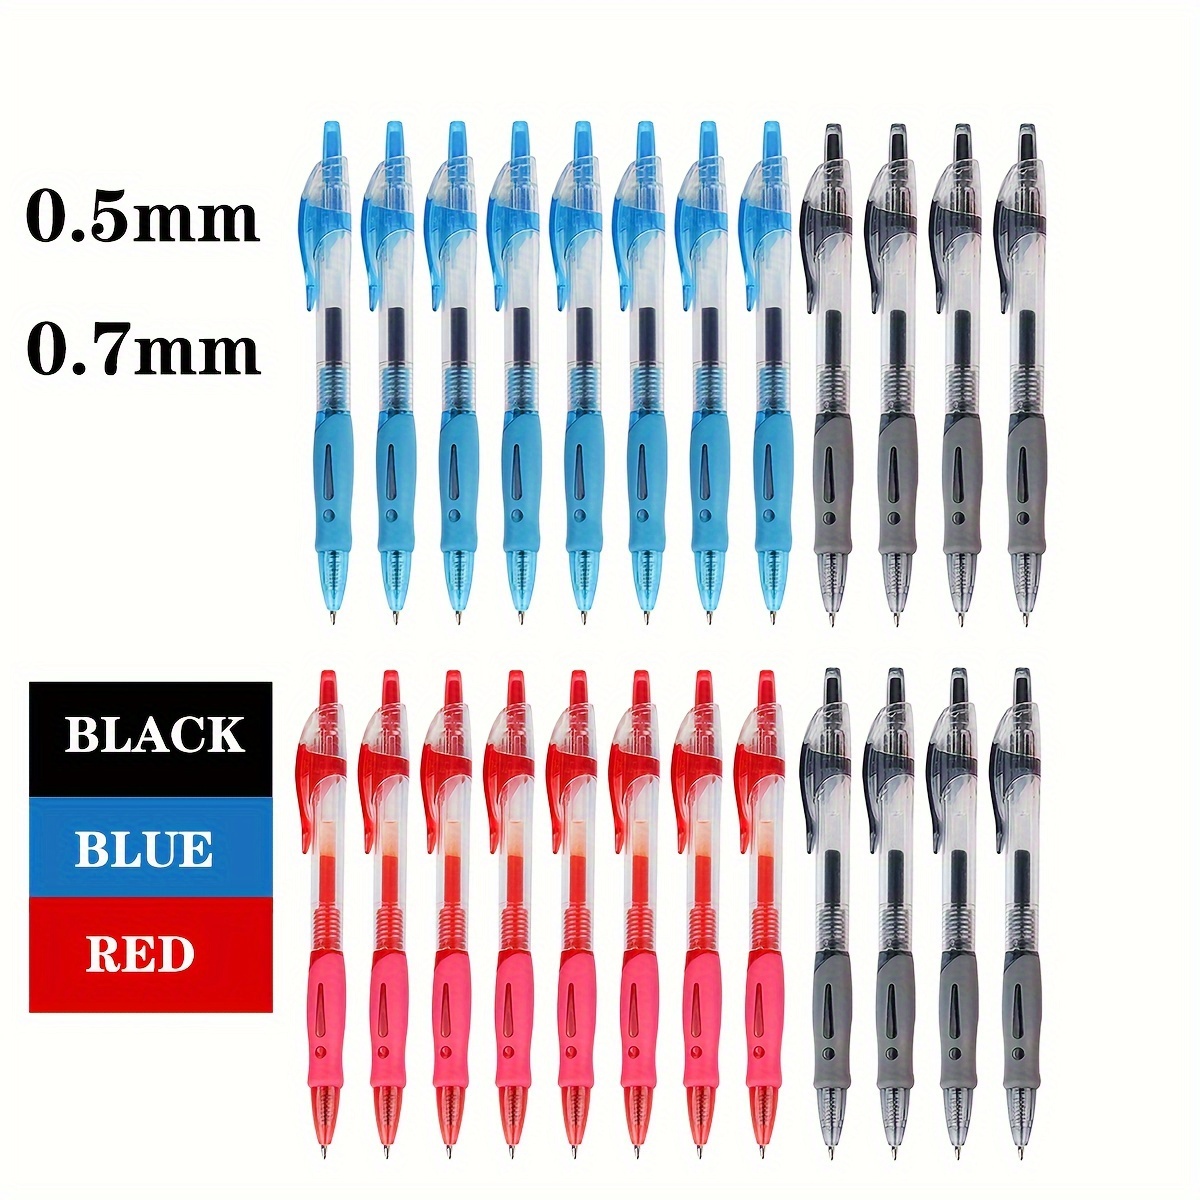 

Bulk Piece Of 12 Retractable Gel Ink Pens - Bold Black, Perfect For Students & Professionals